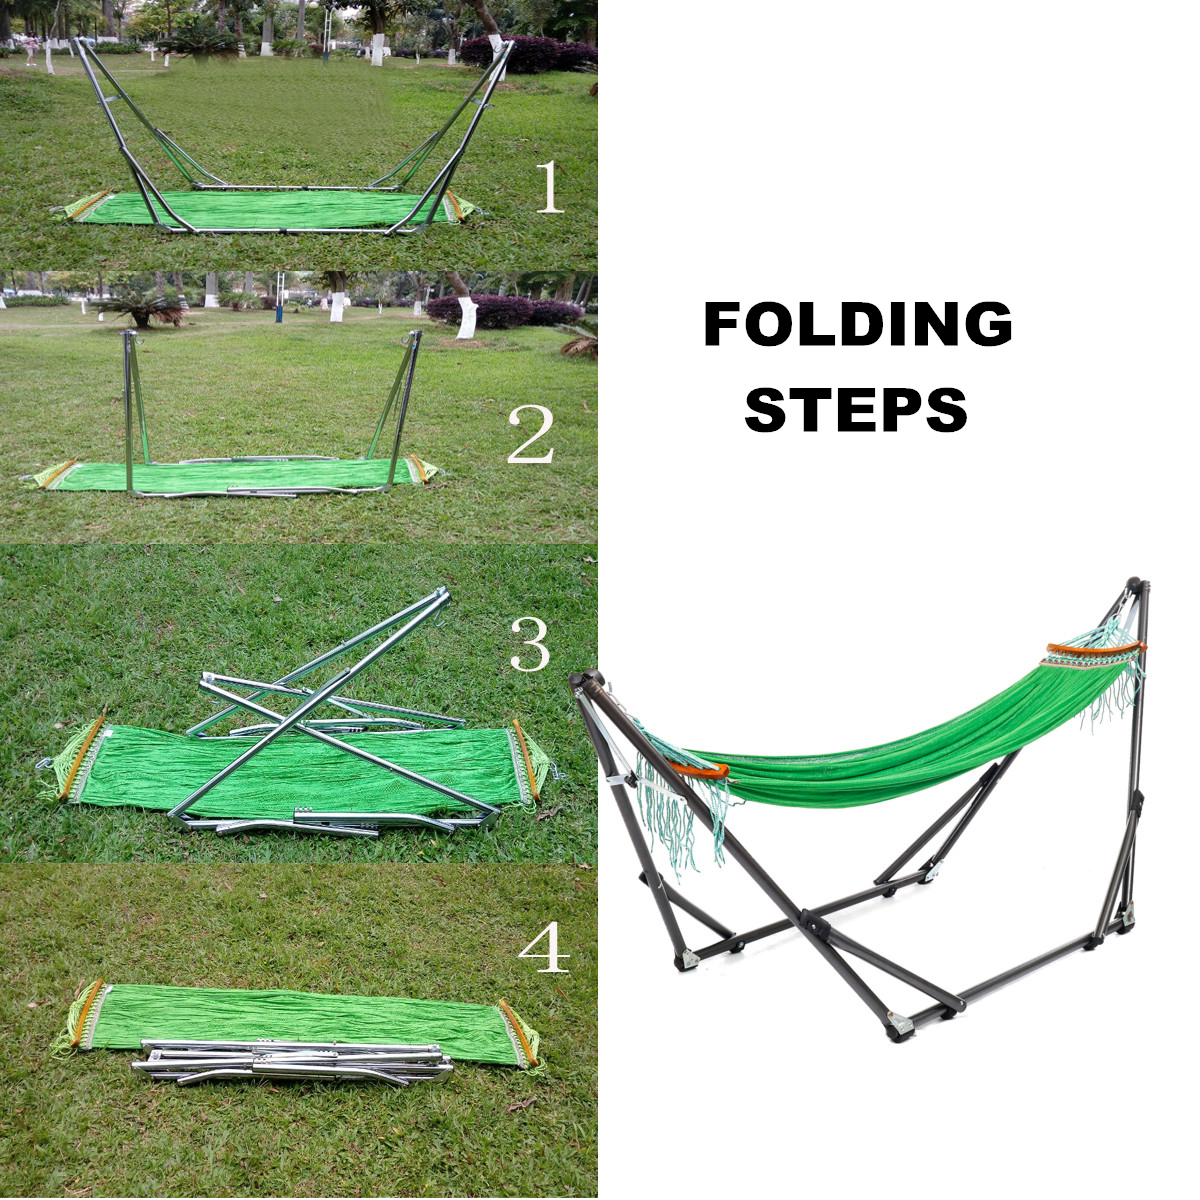 Portable Canvas Hammock Stand Portable Multifunctional Practical Outdoor Garden Swing Hammock Single Hanging Chair Bed Leisure Camping Travel 23